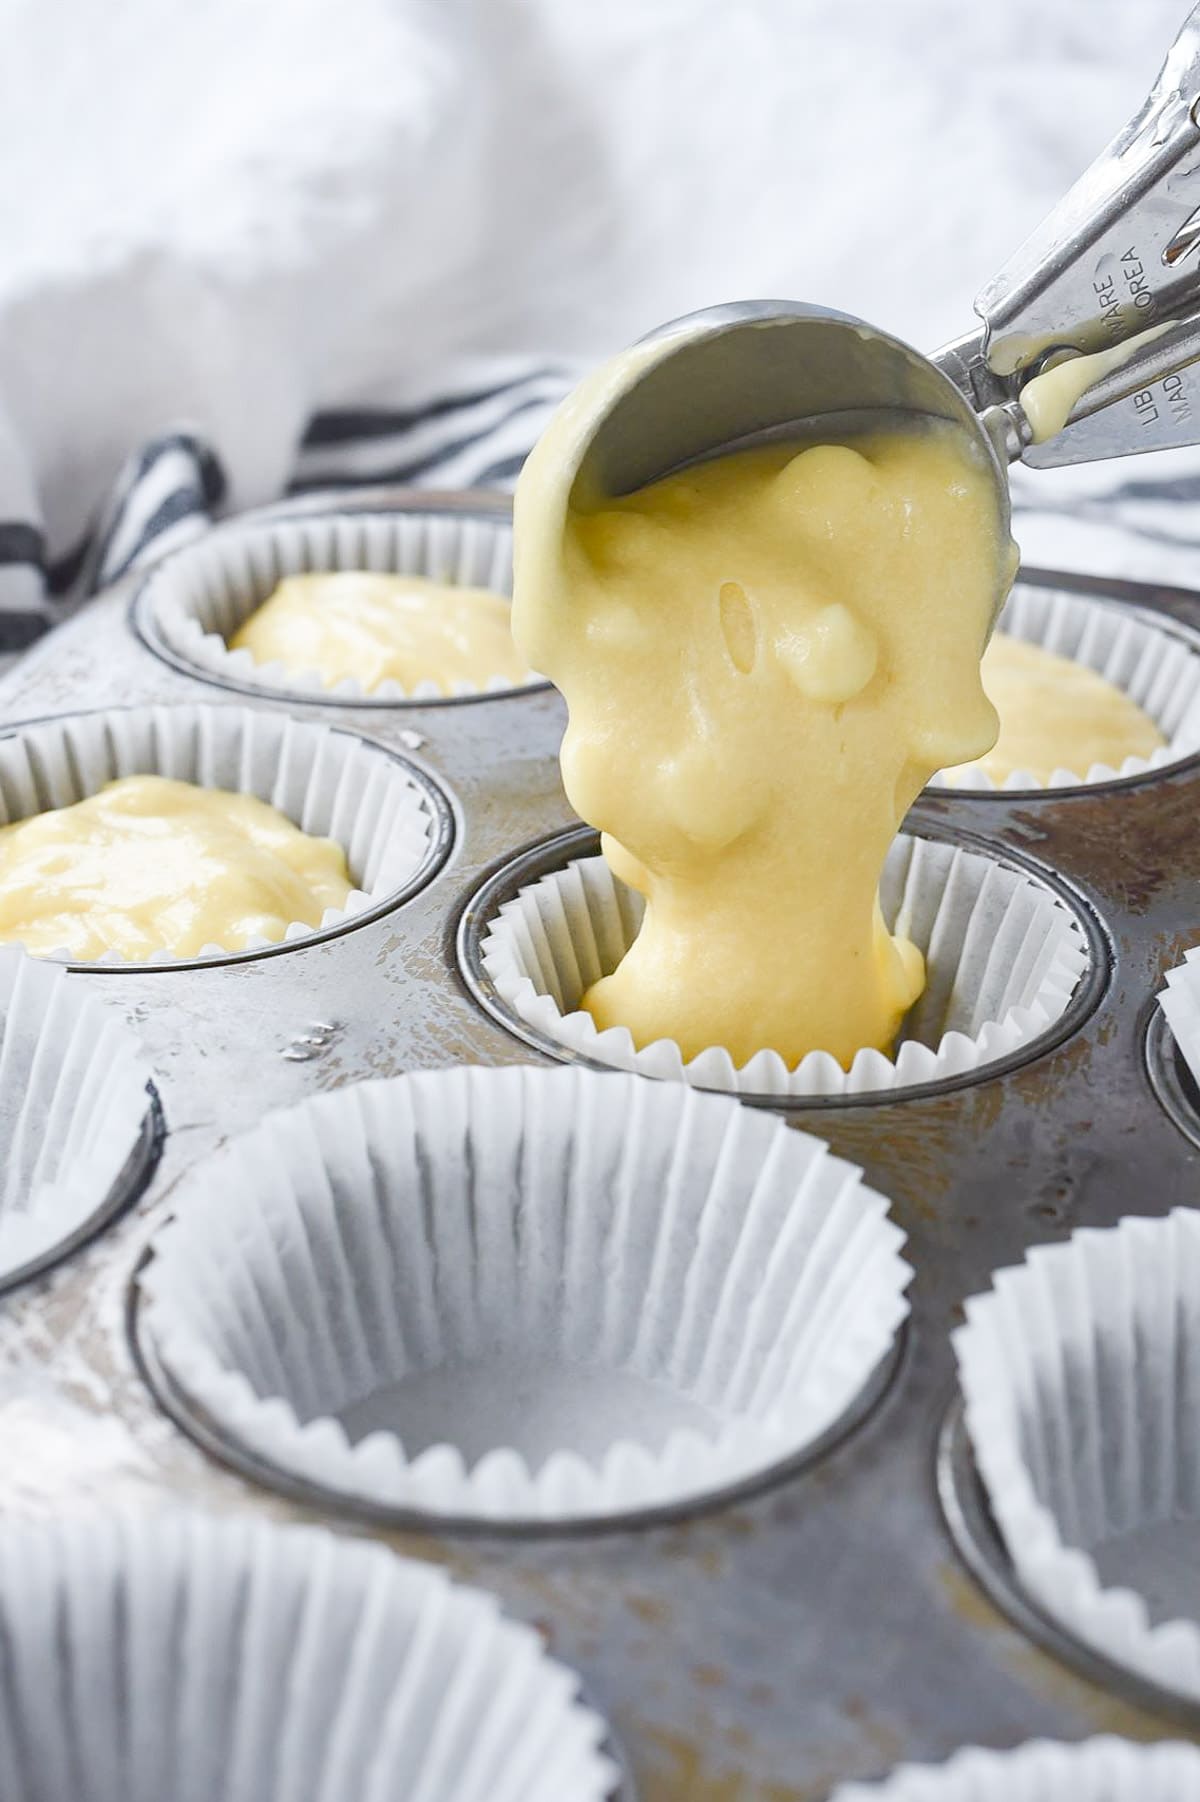 pouring muffin batter into muffin tin